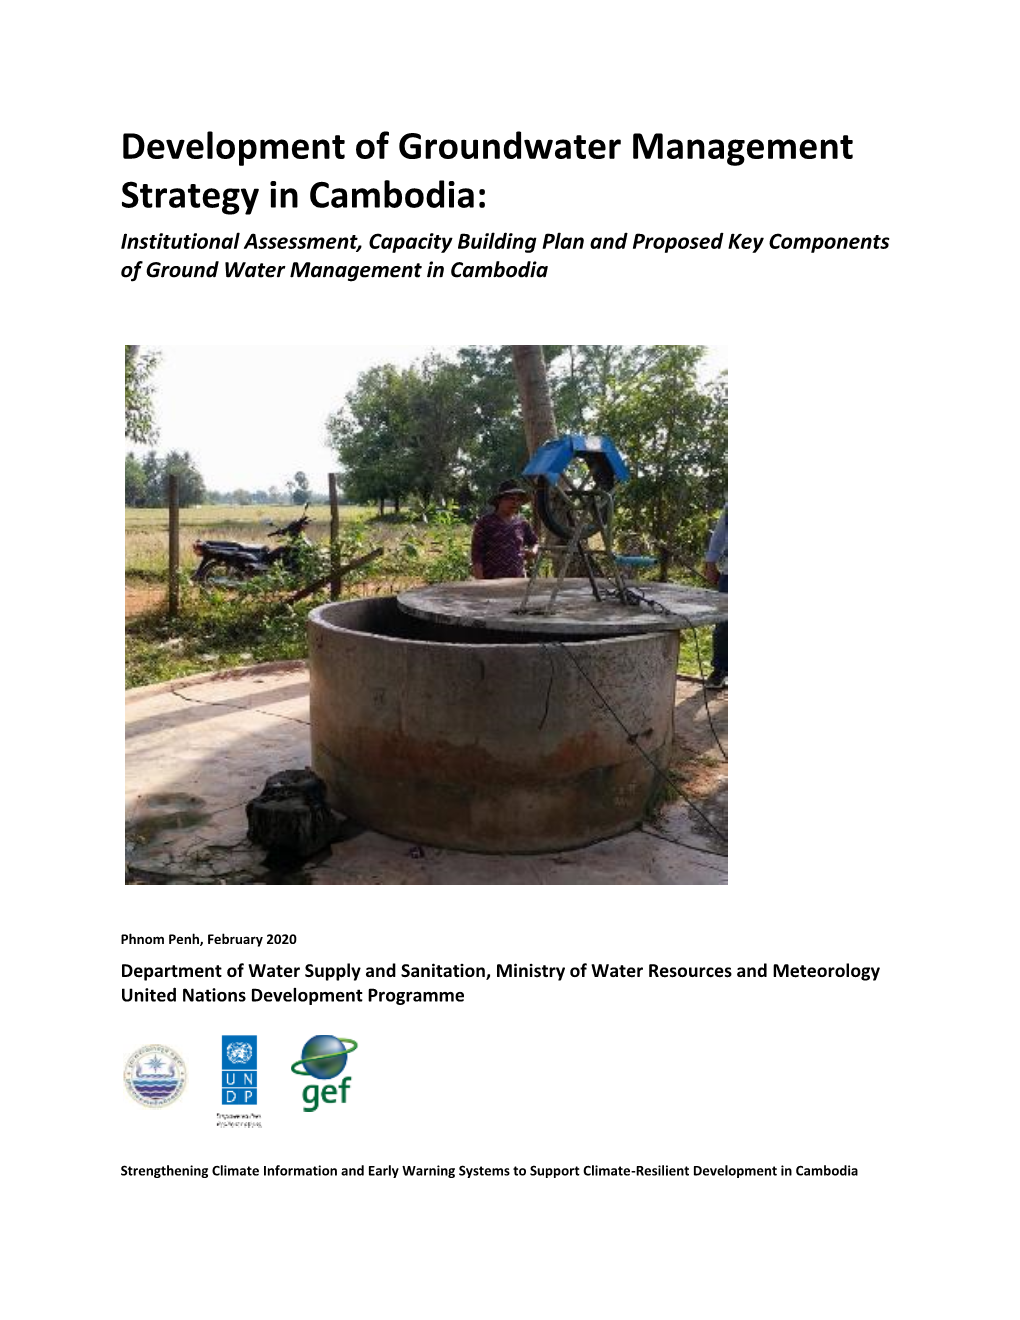 Development of Groundwater Management Strategy in Cambodia